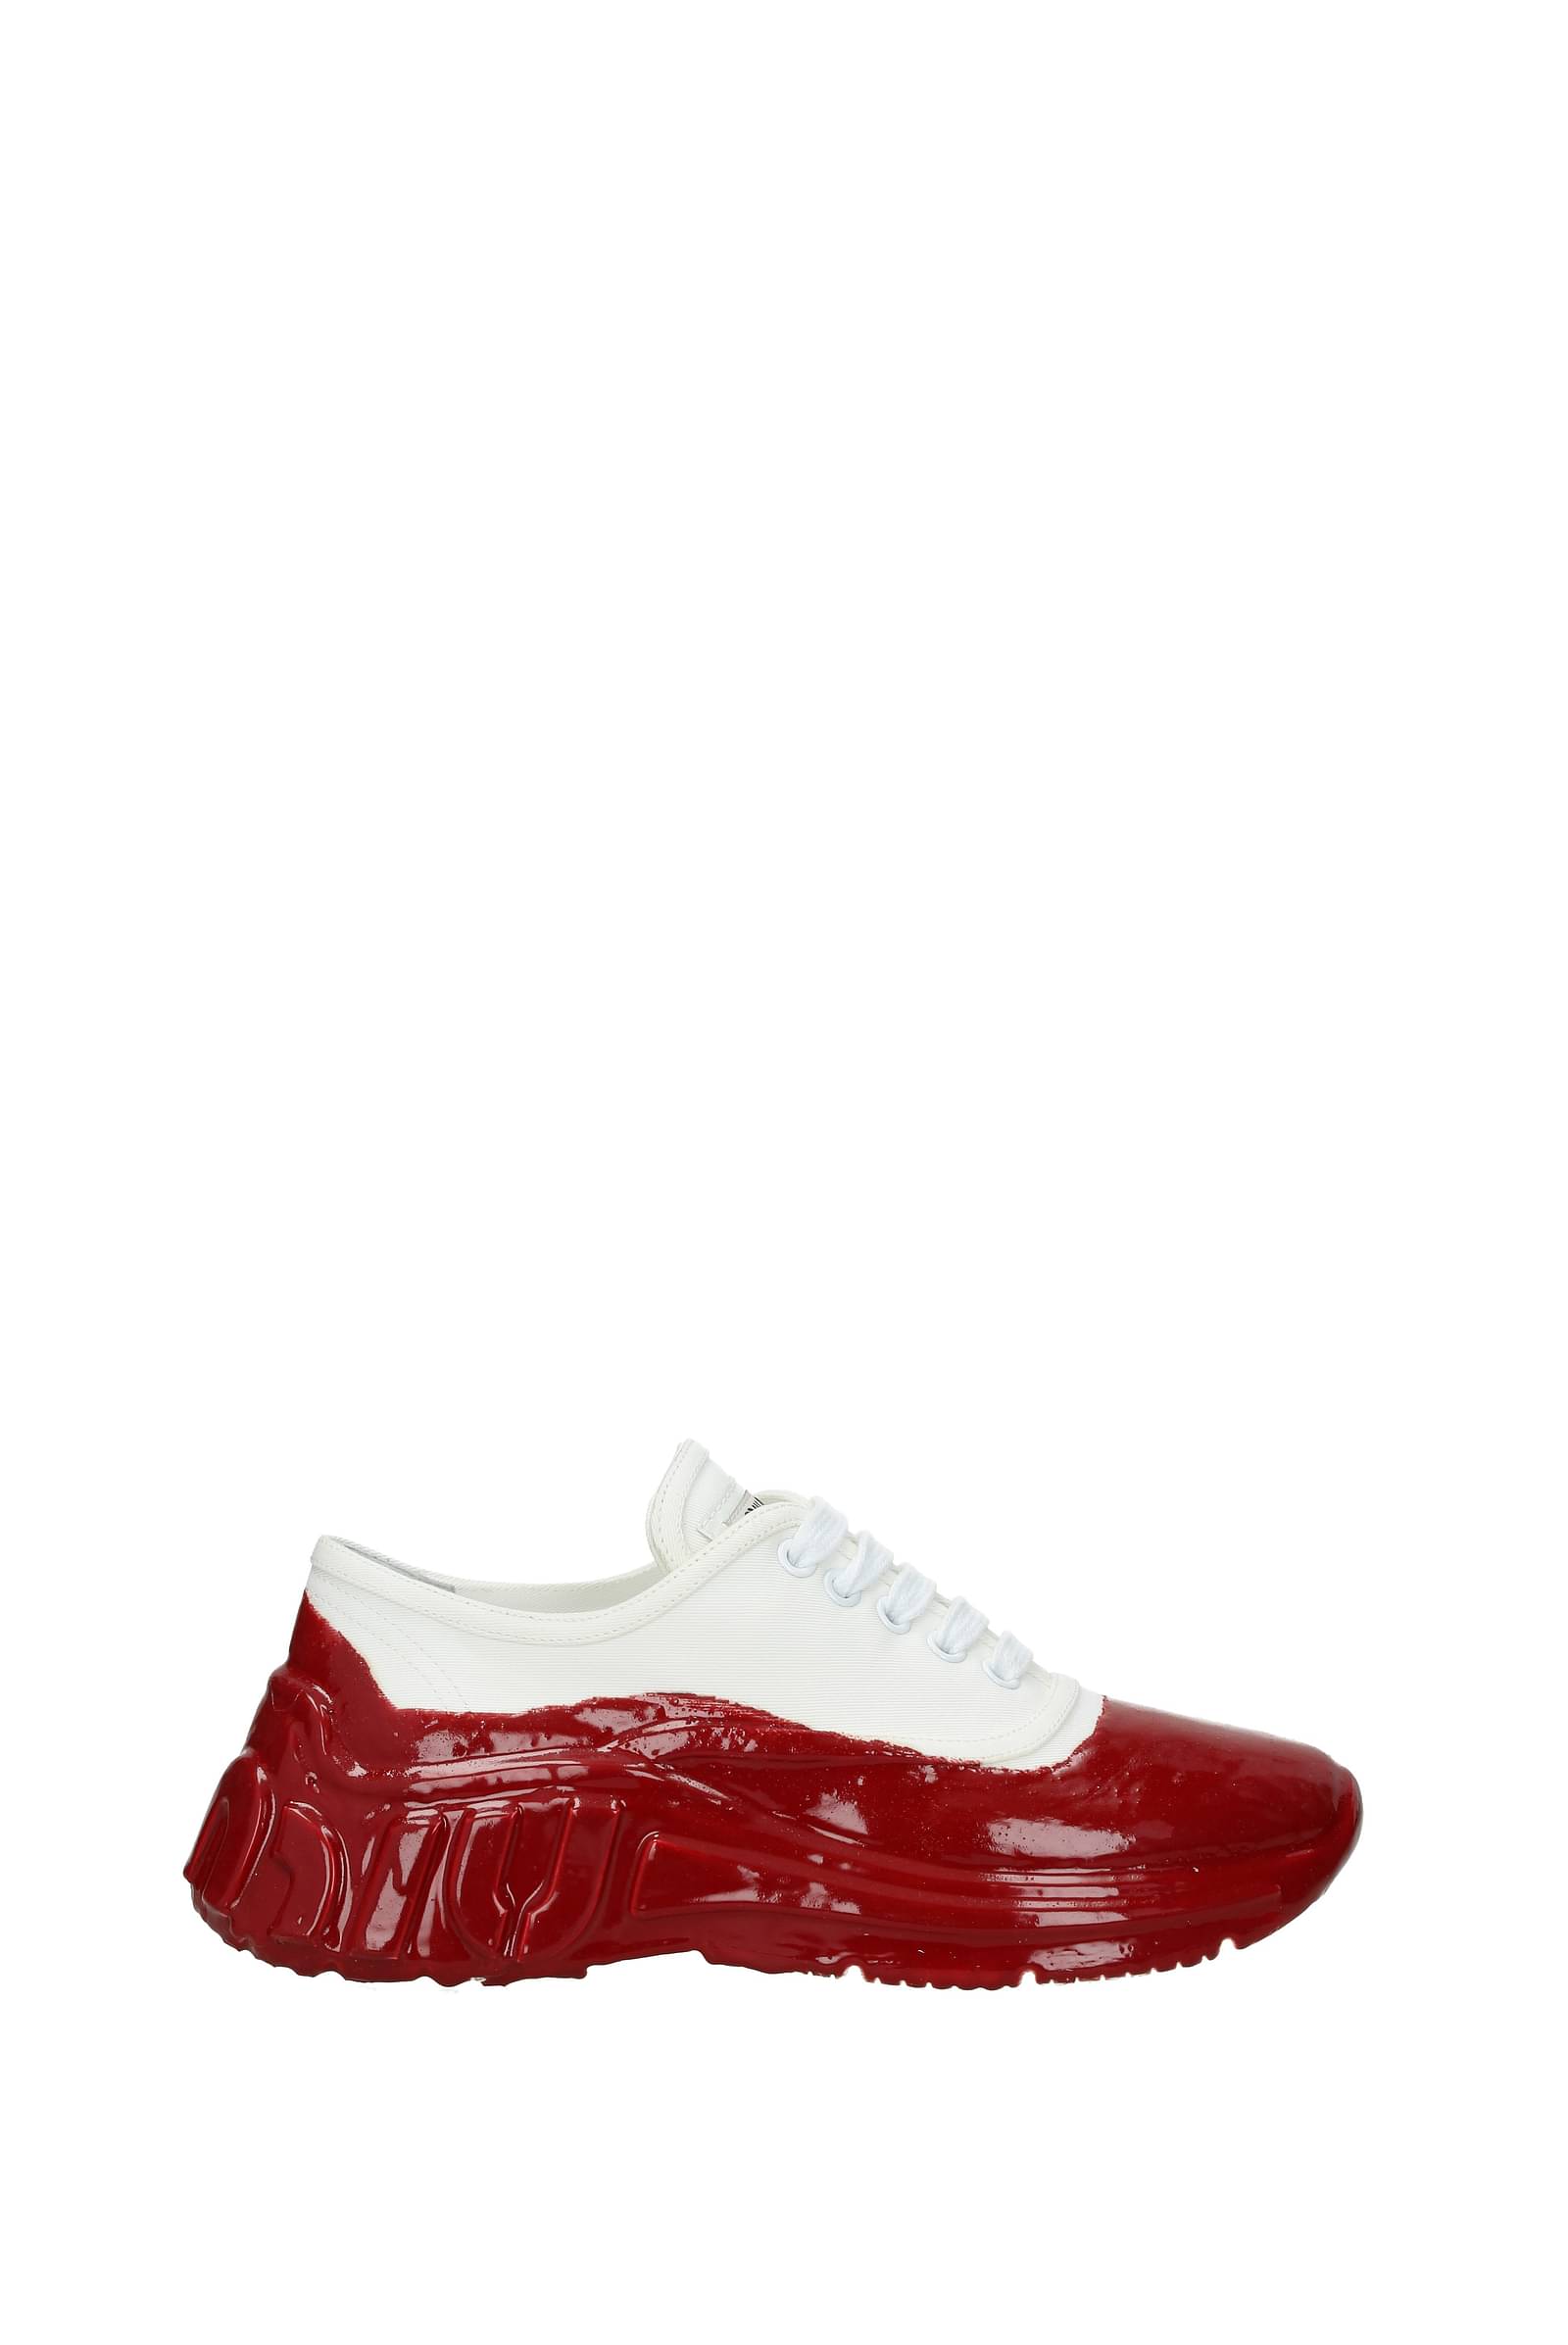 Miu Miu sneakers on sale: special price for you